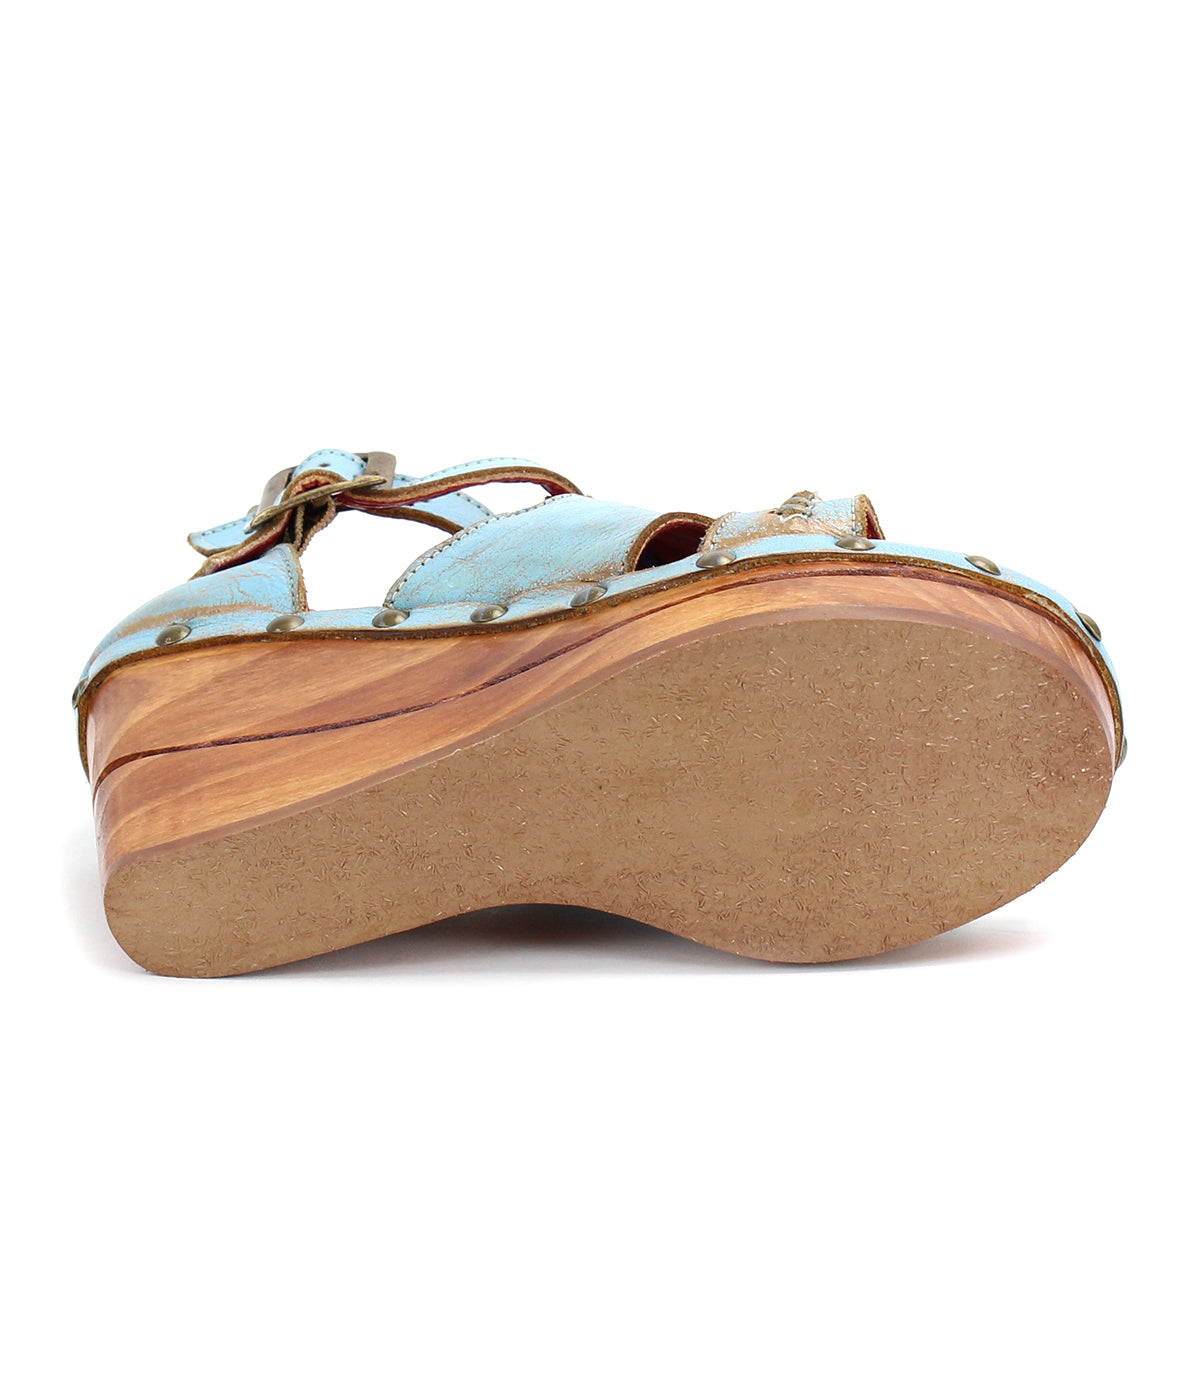 The Bed Stu Princess wooden wedge sandal for women features woven strappy uppers.